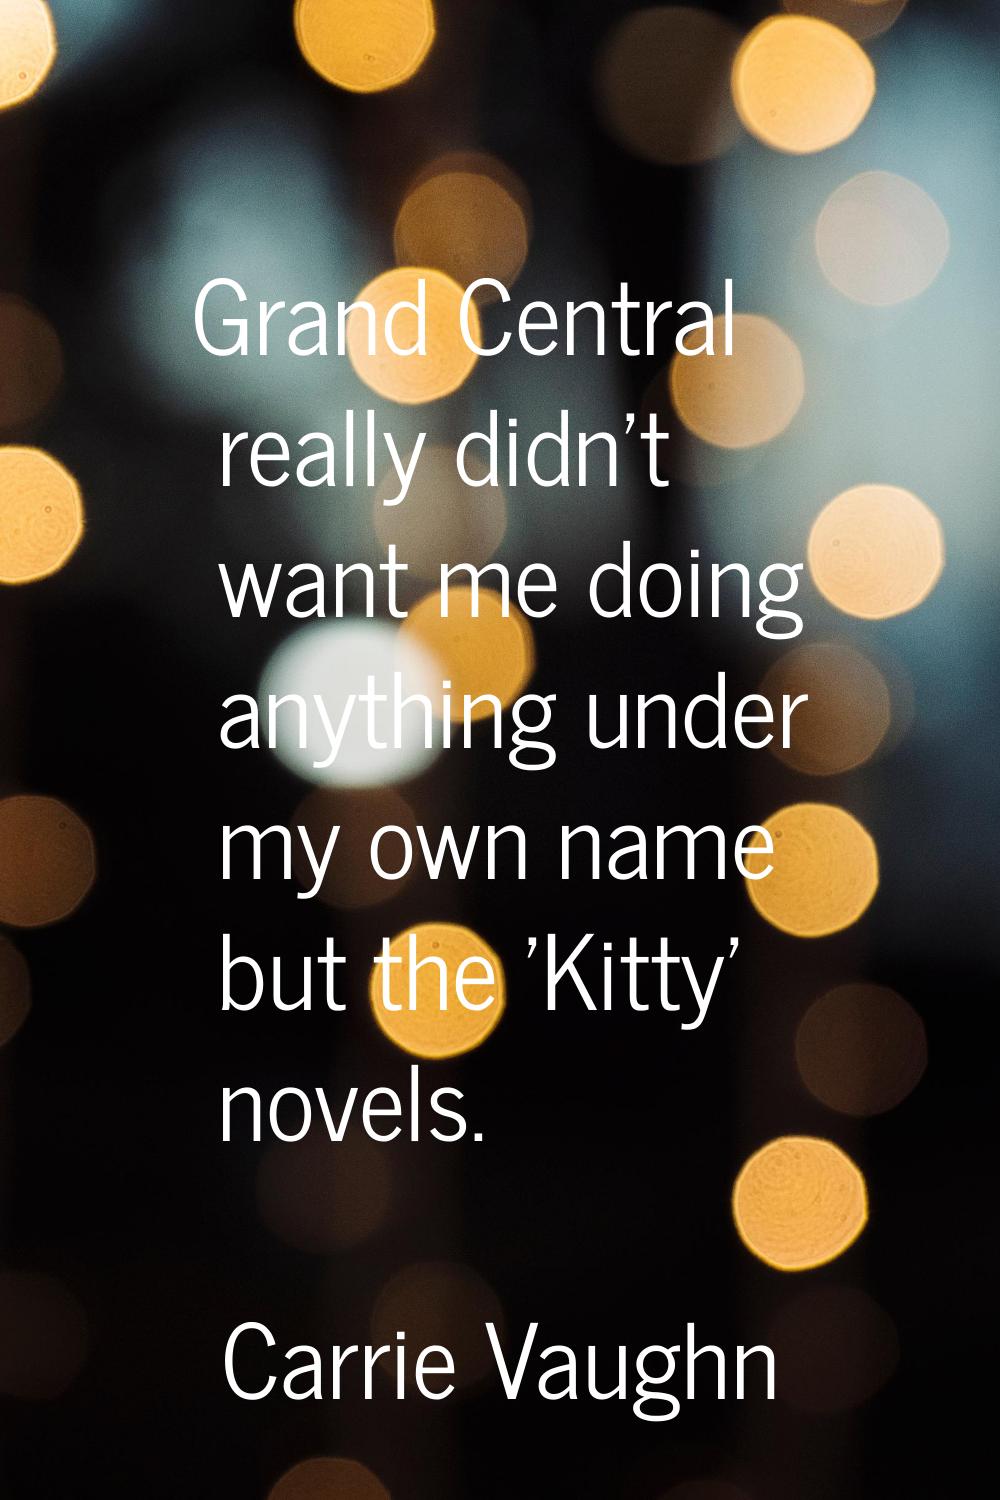 Grand Central really didn't want me doing anything under my own name but the 'Kitty' novels.